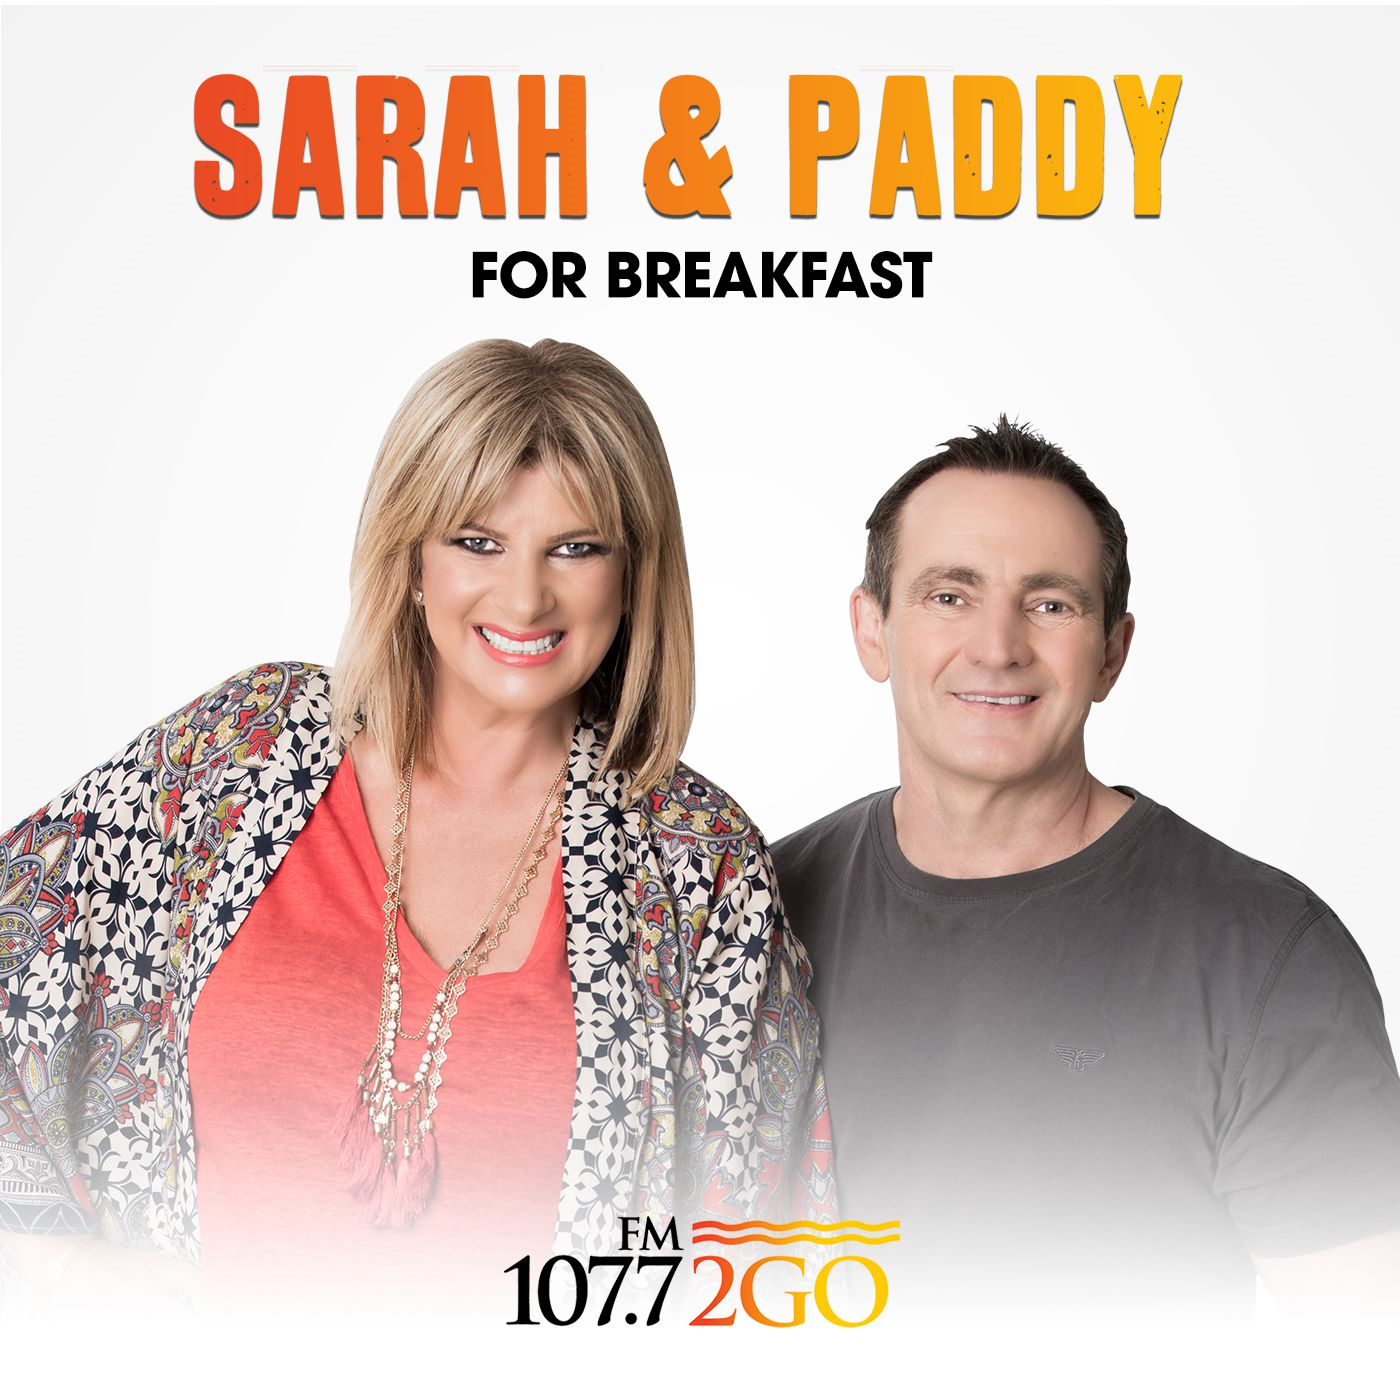 Sarah and Paddy - How Do You Have Your Hamburger?